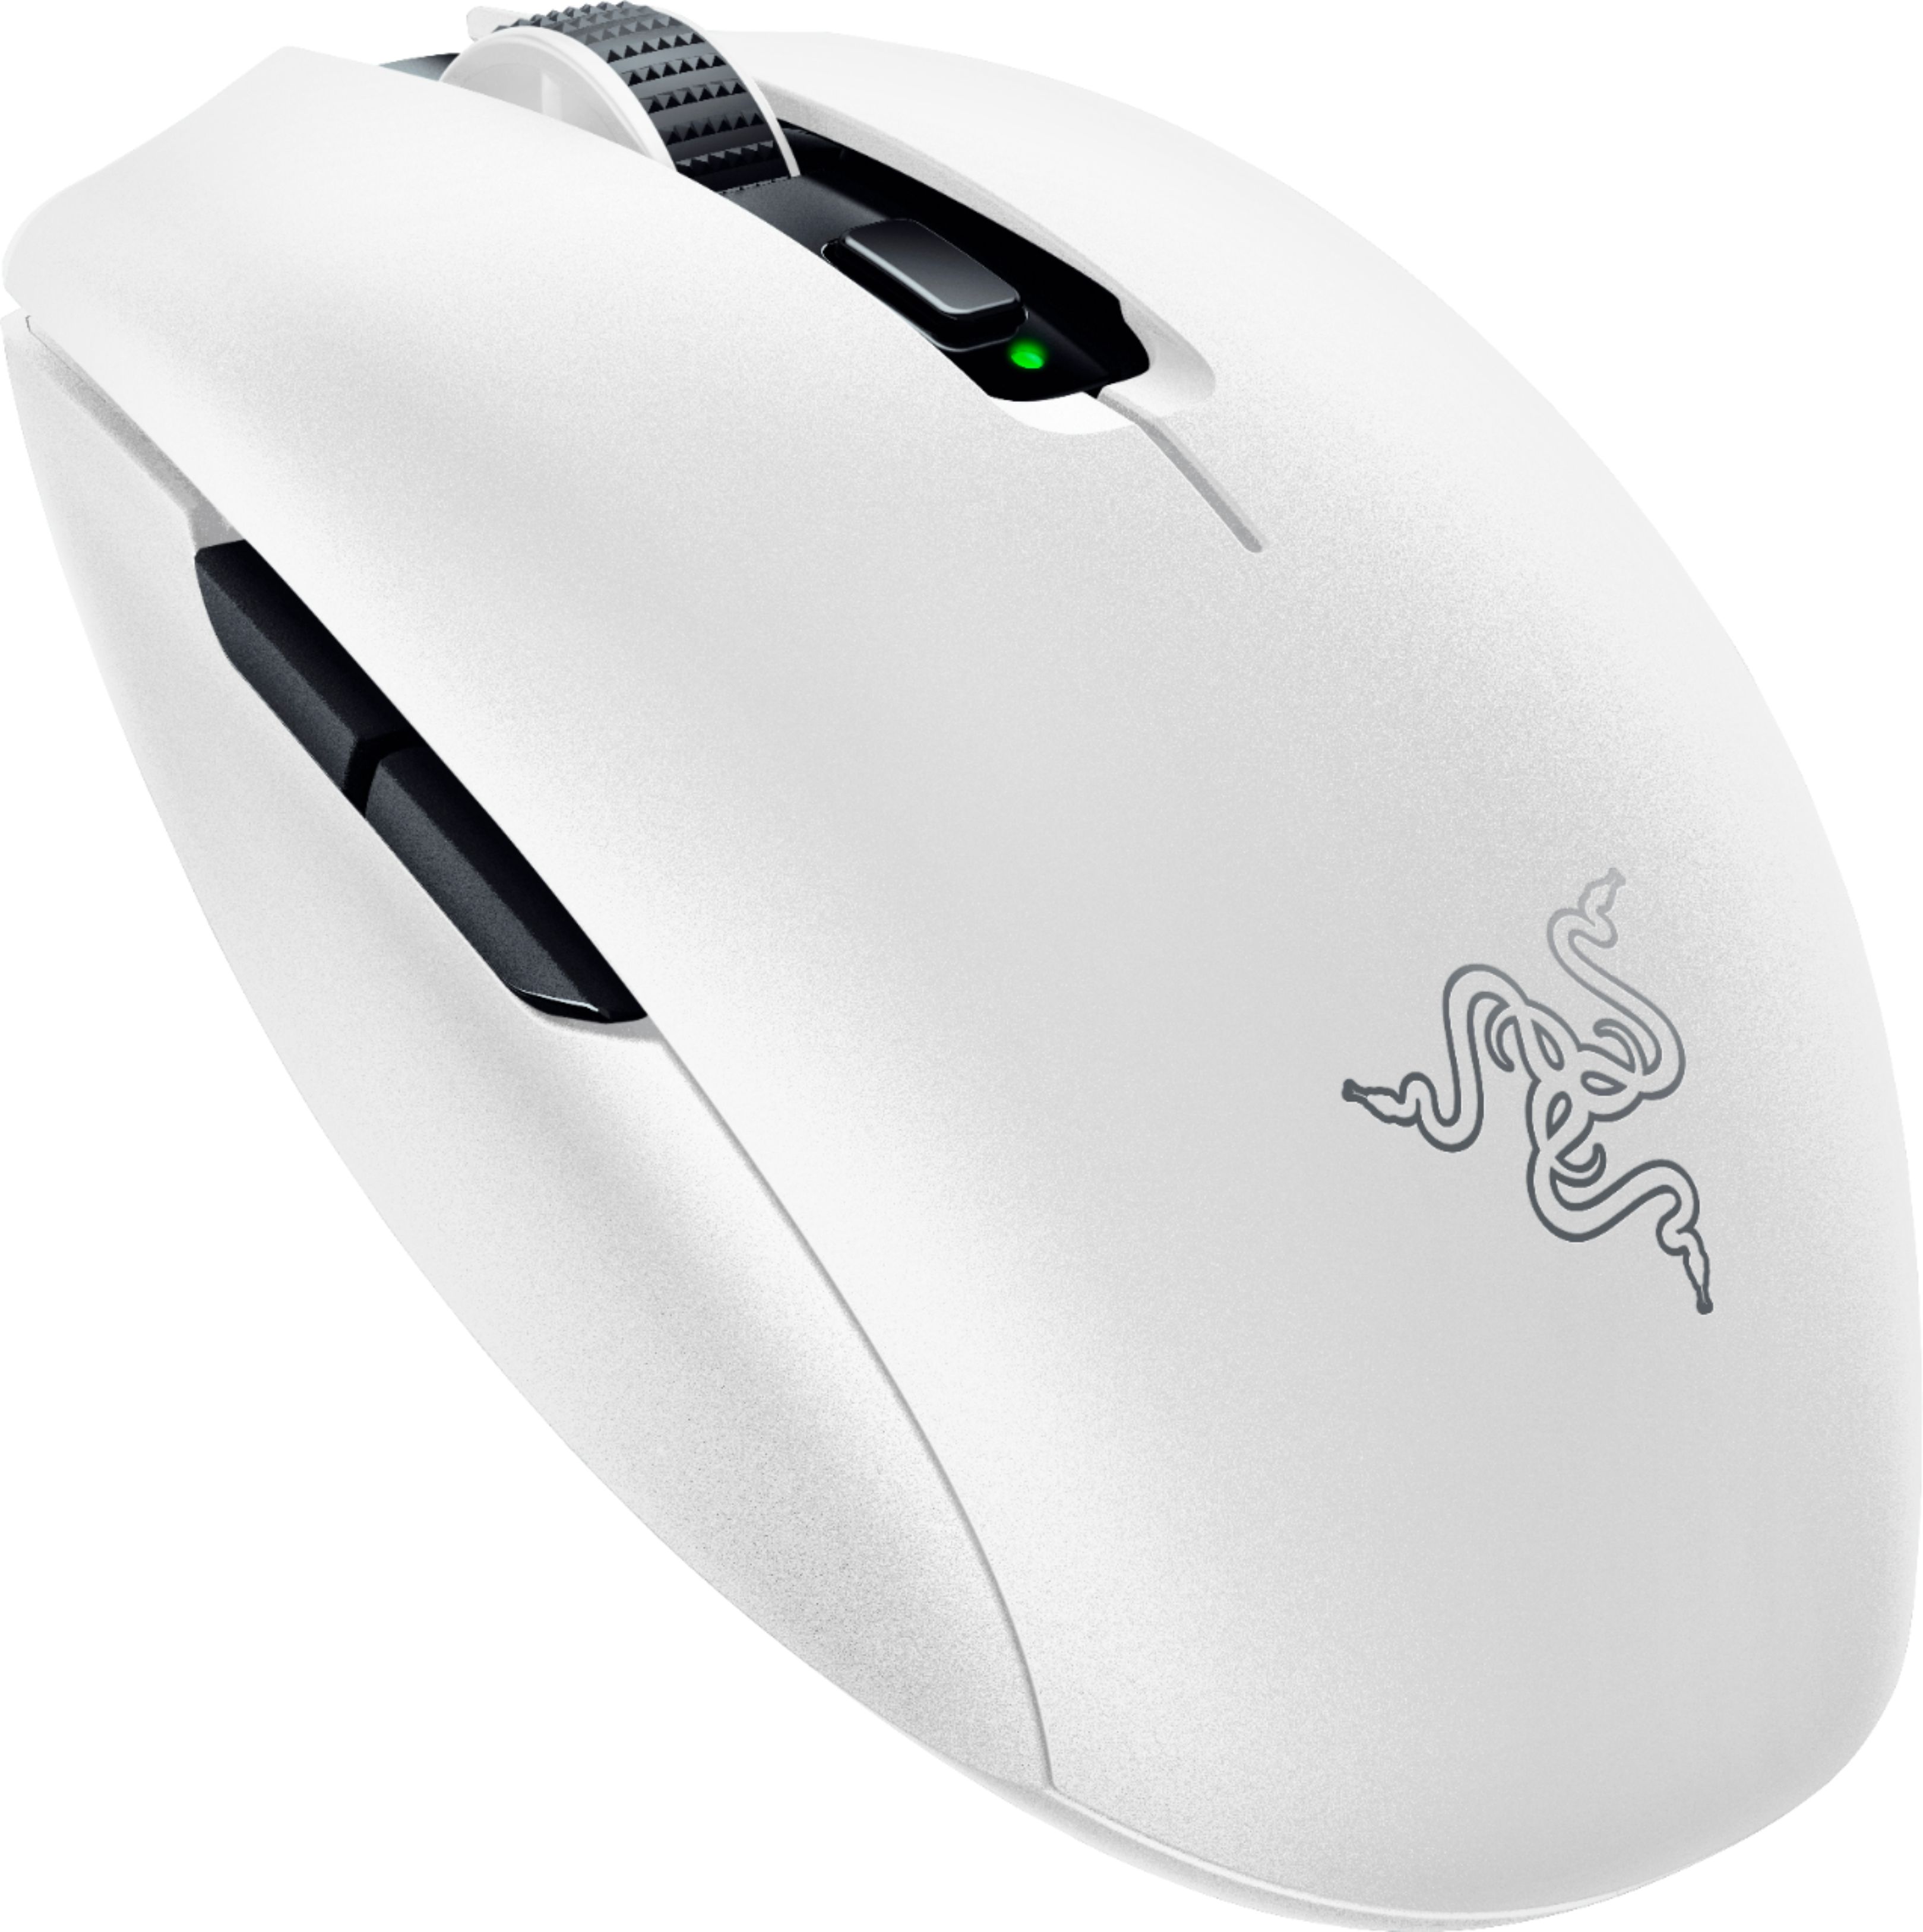 Angle View: Razer - Orochi V2 Lightweight Wireless Optical Gaming Mouse With 950 Hour Battery Life - White